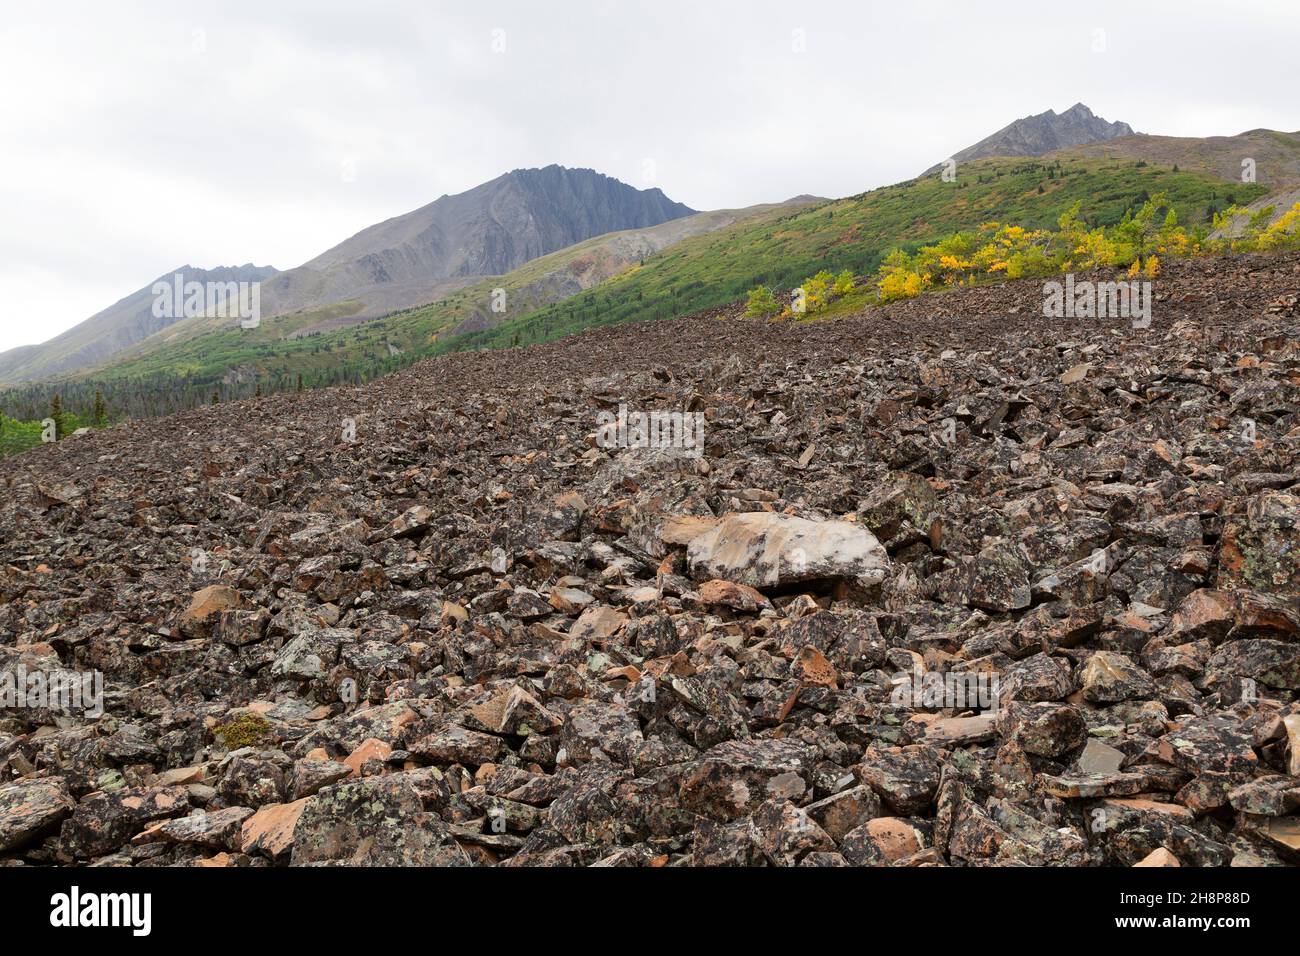 Scree in Kluane National Park and Reserve in the Yukon, Canada. The parkland covers an expanse of more than 22,000 square kilometres. Stock Photo